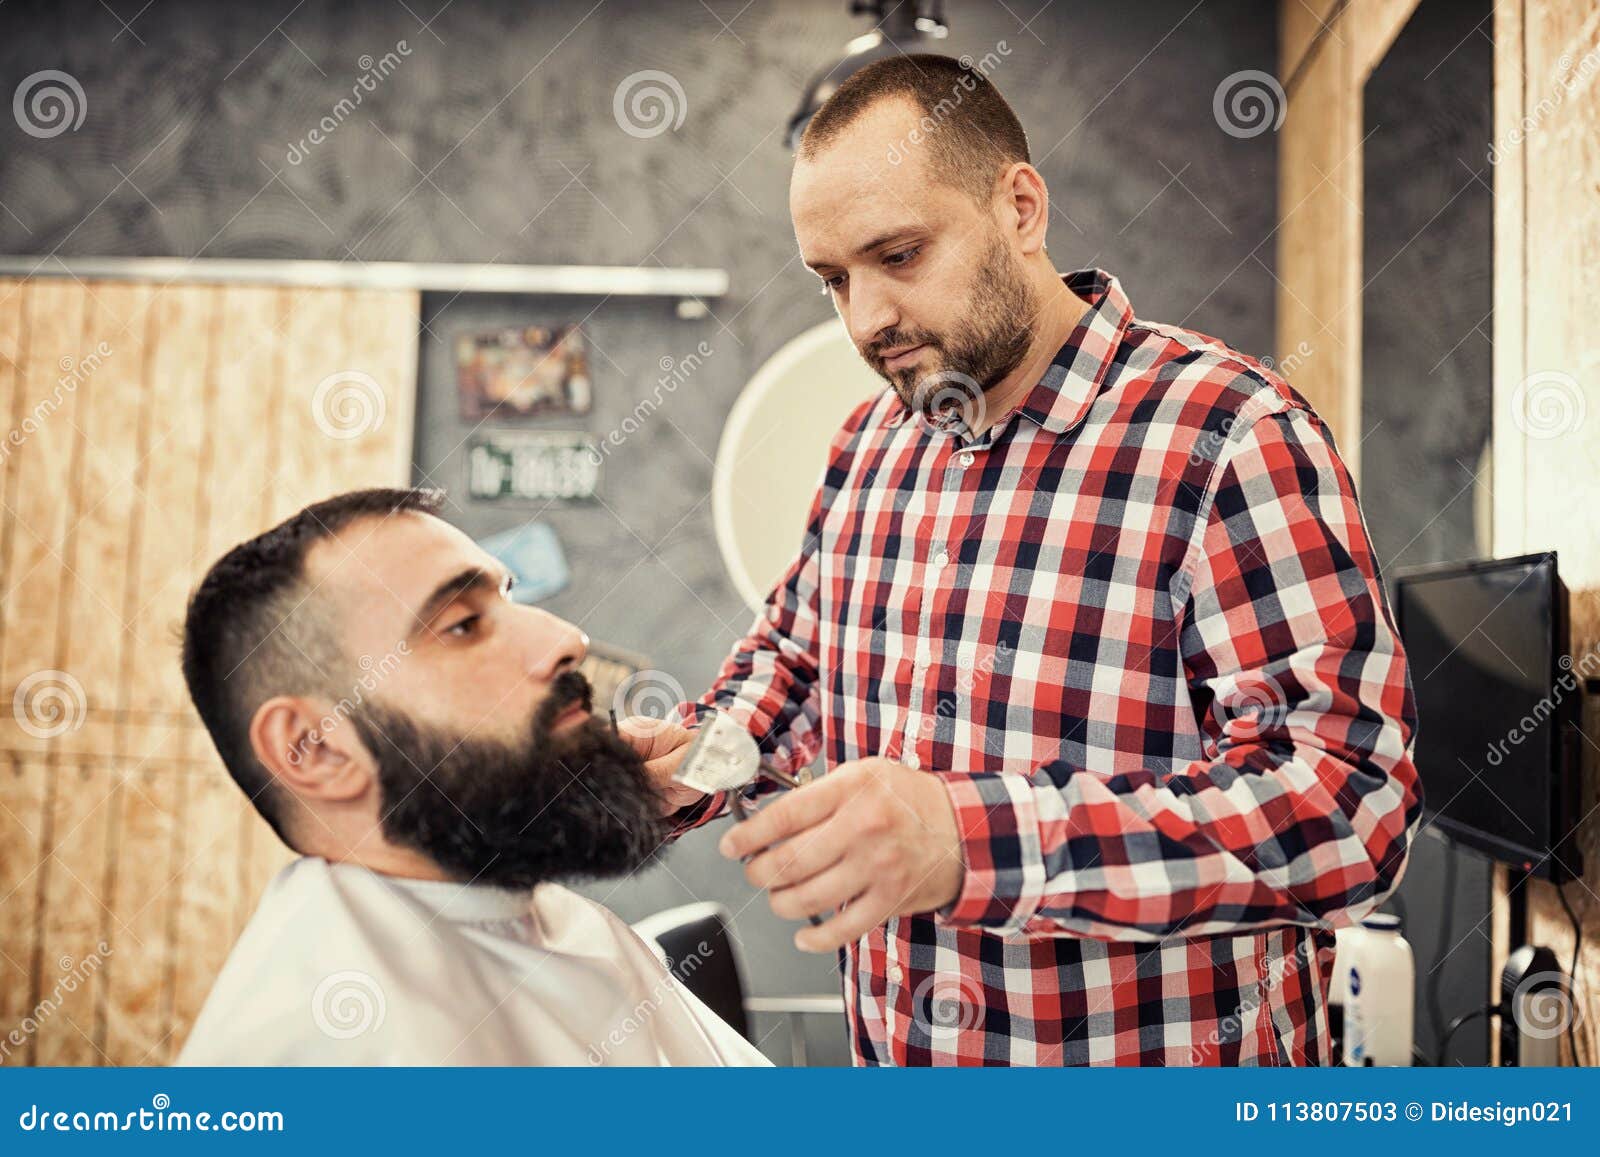 Client during Beard and Moustache Grooming at Barber Stock Image ...